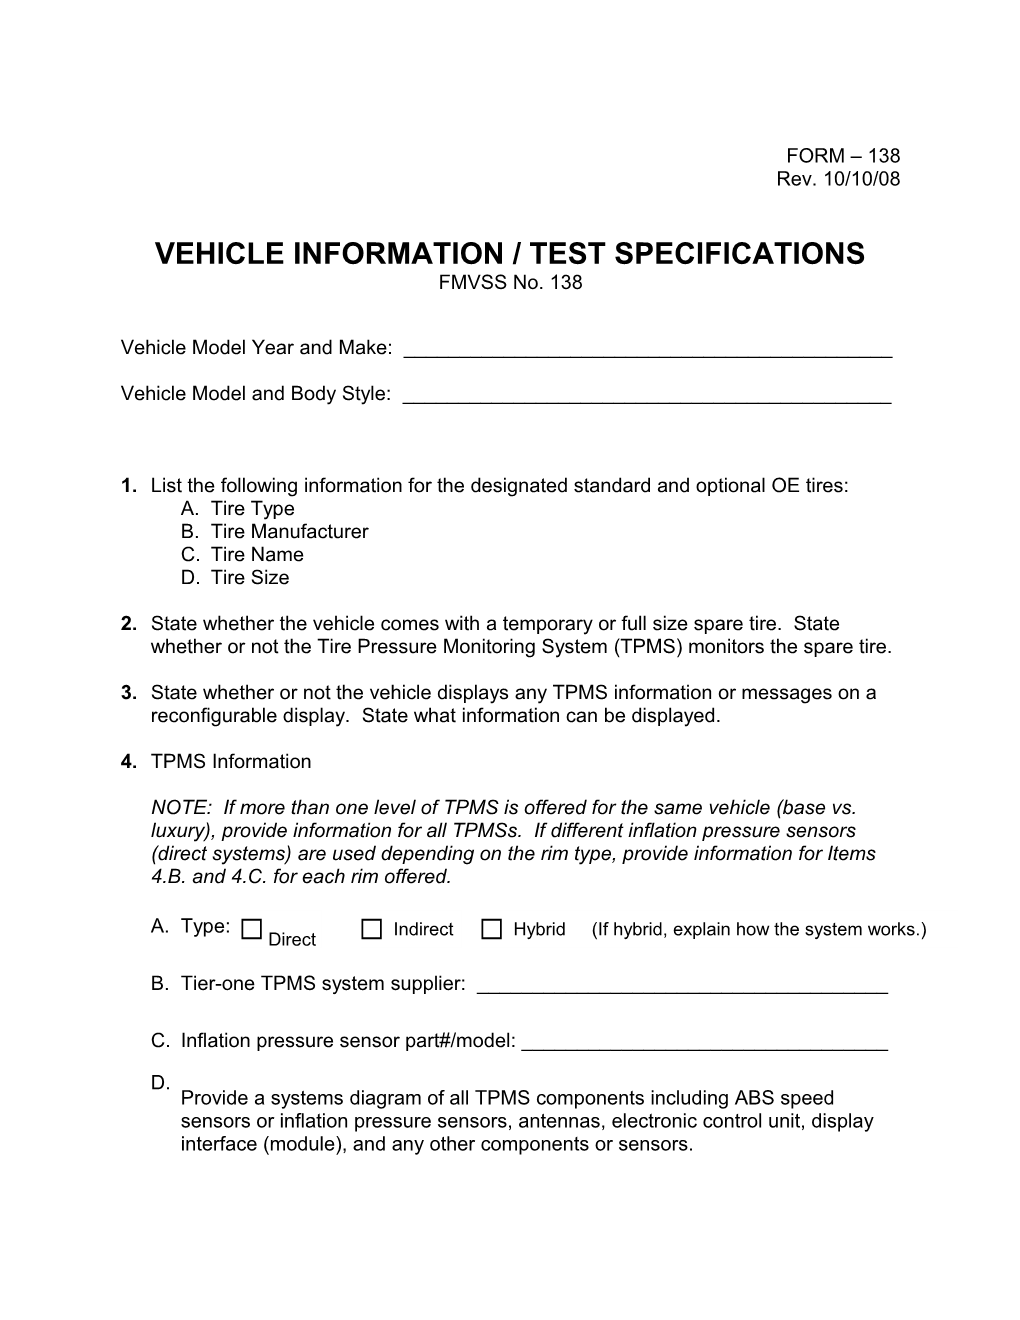 Test Vehicle Information/Test Specifications